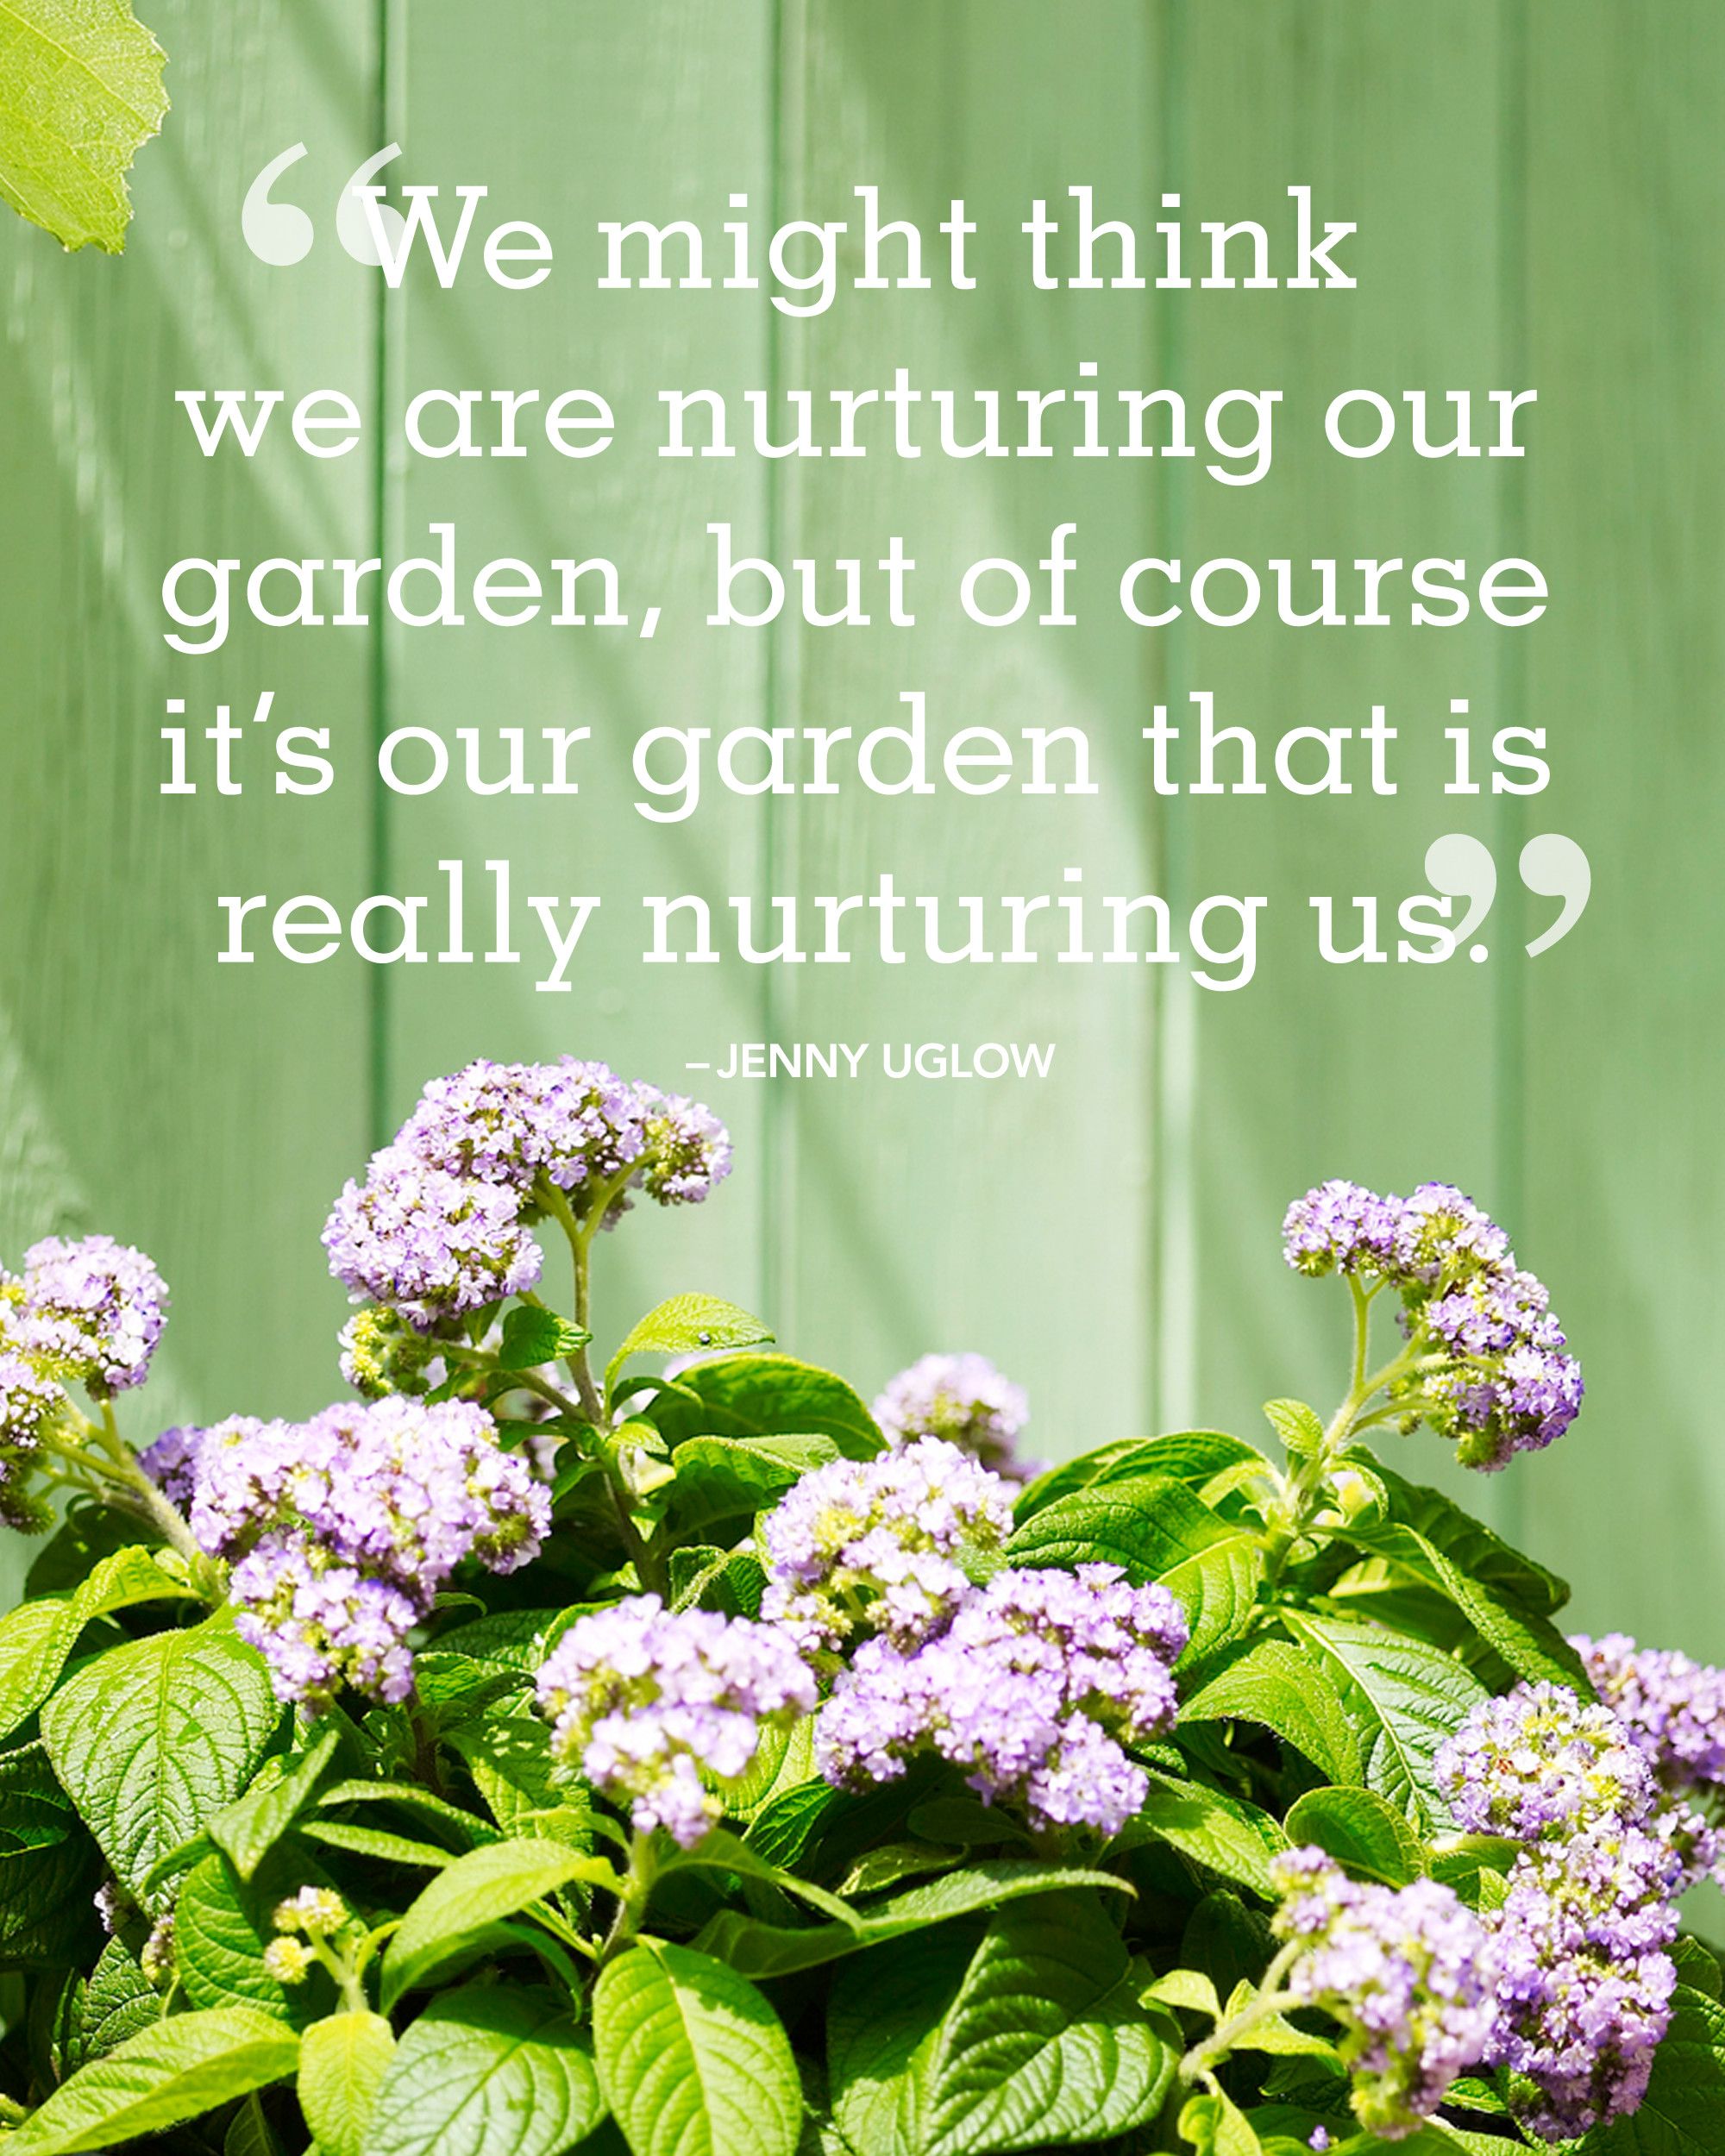 We might think we are nurturing out garden, but of course it’s our garden that is really nurturing us. Jenny Uglow